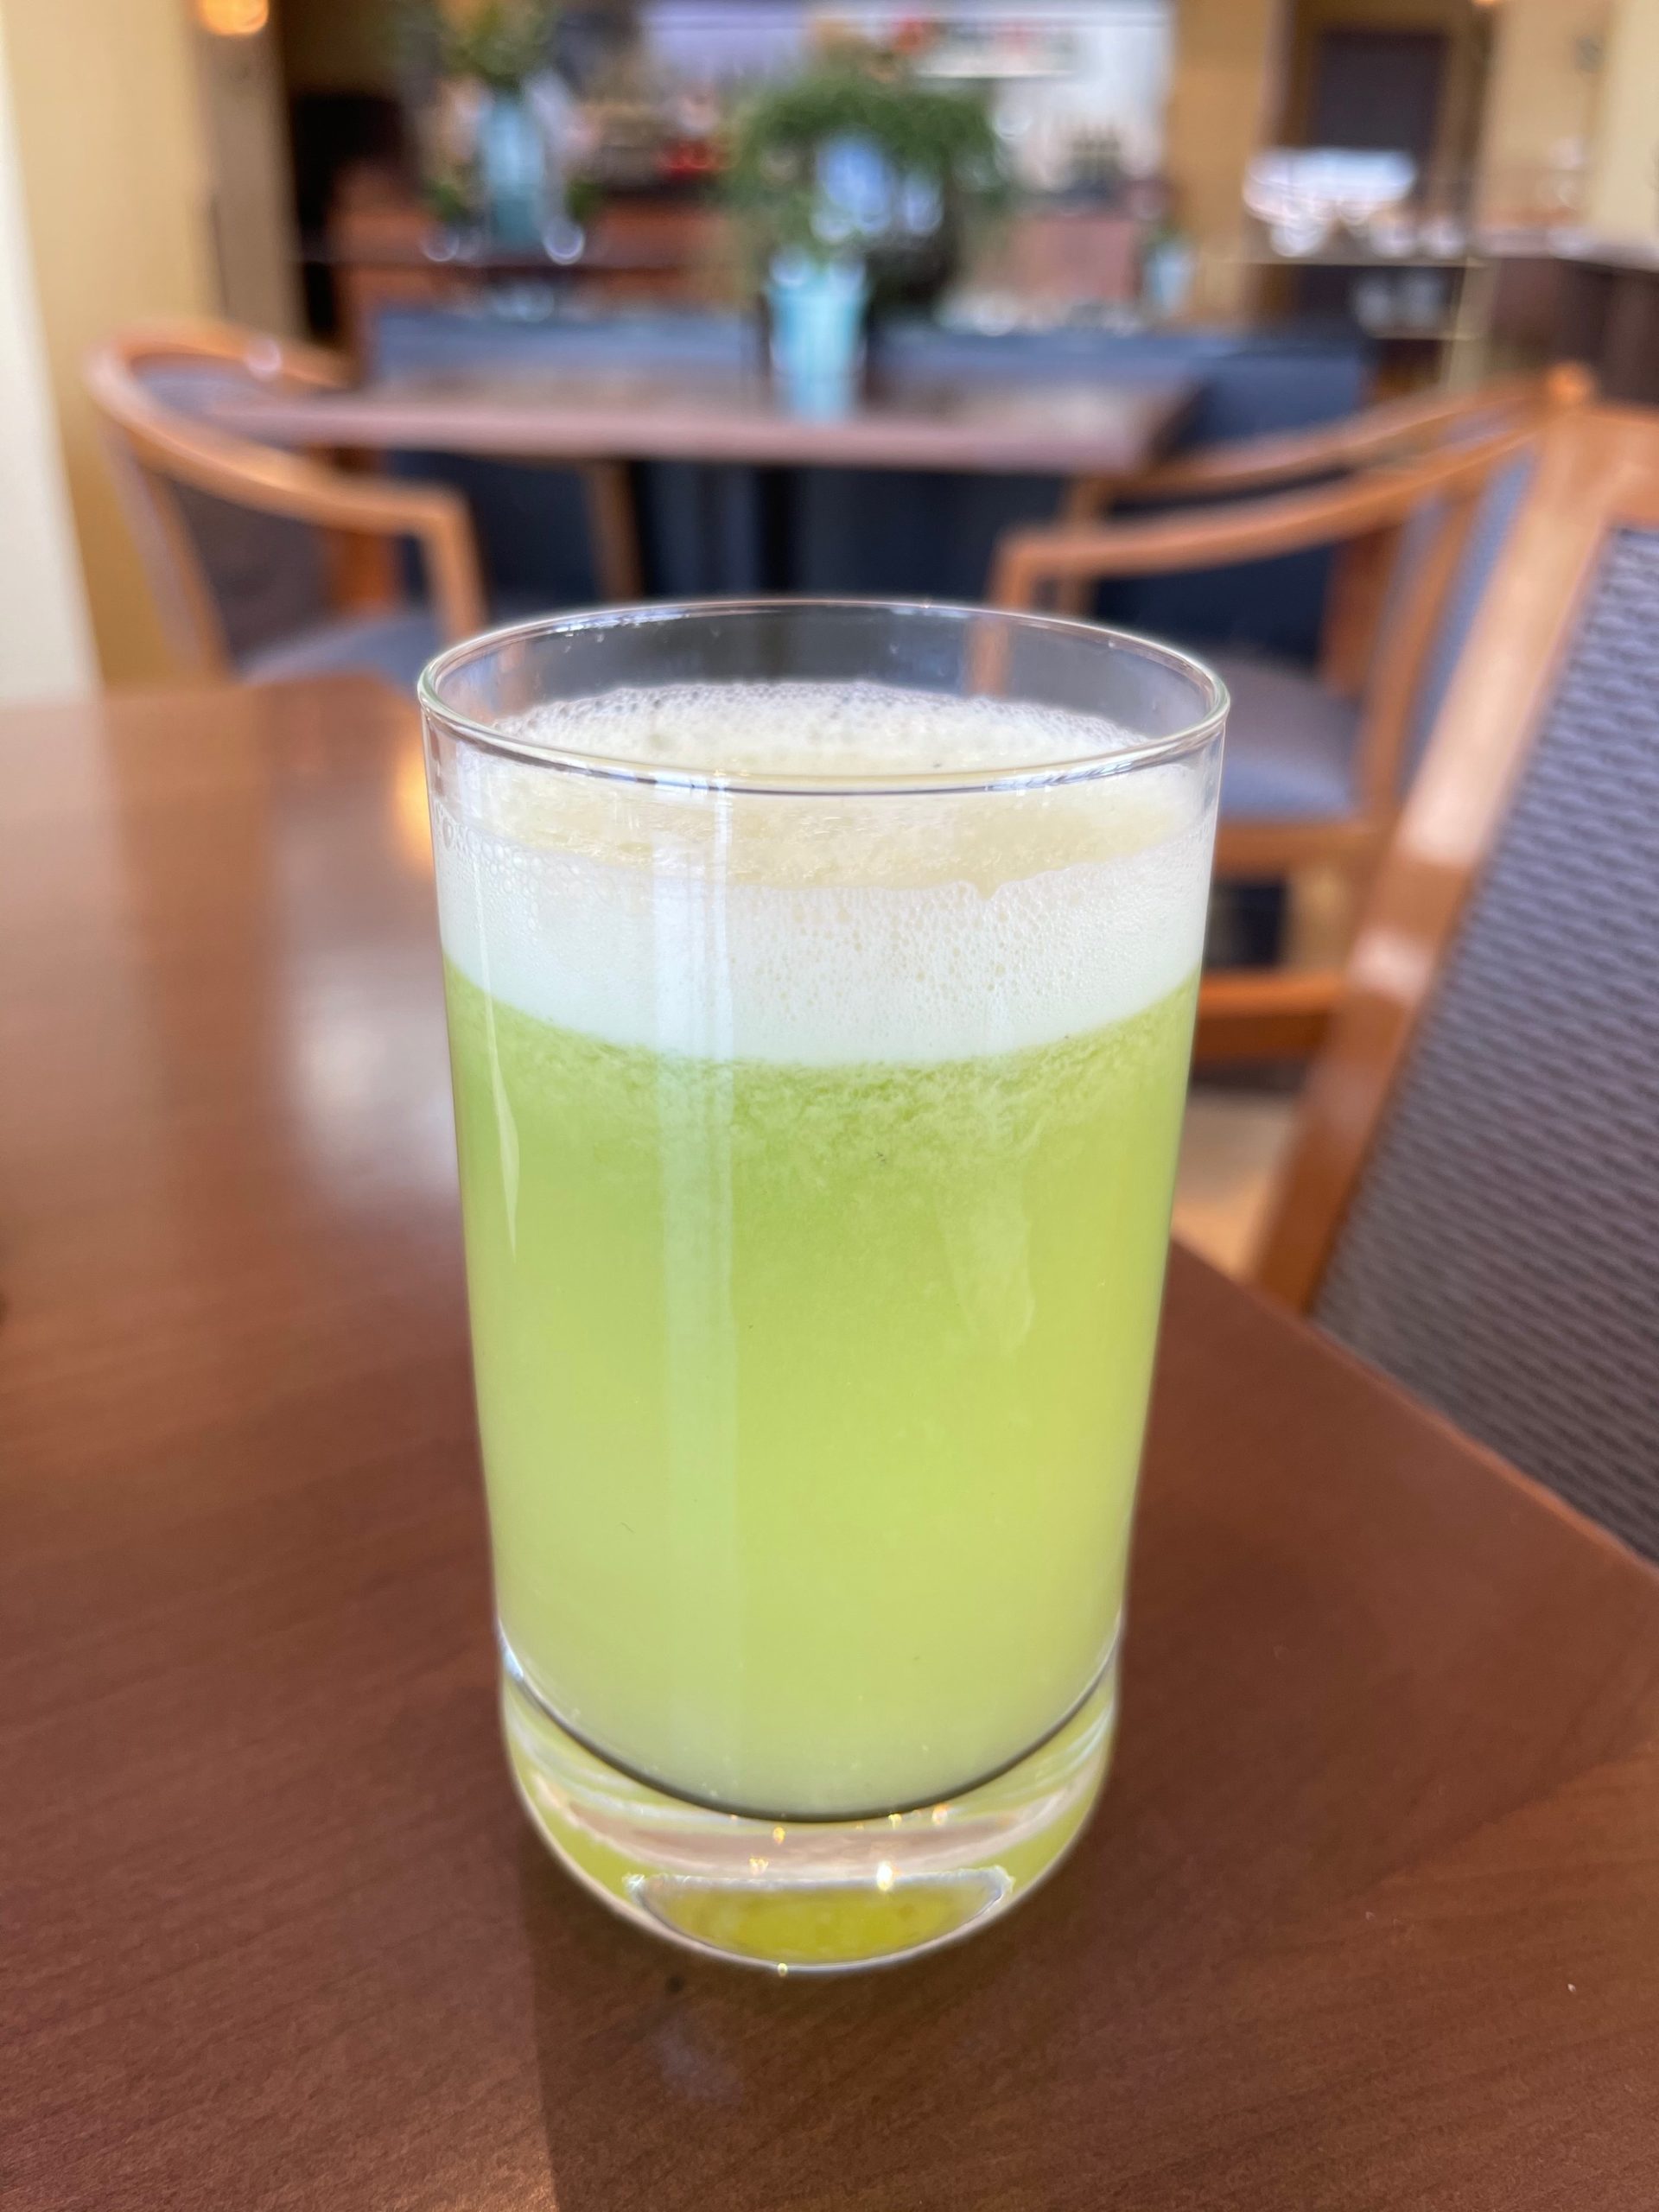 a glass of green liquid on a table